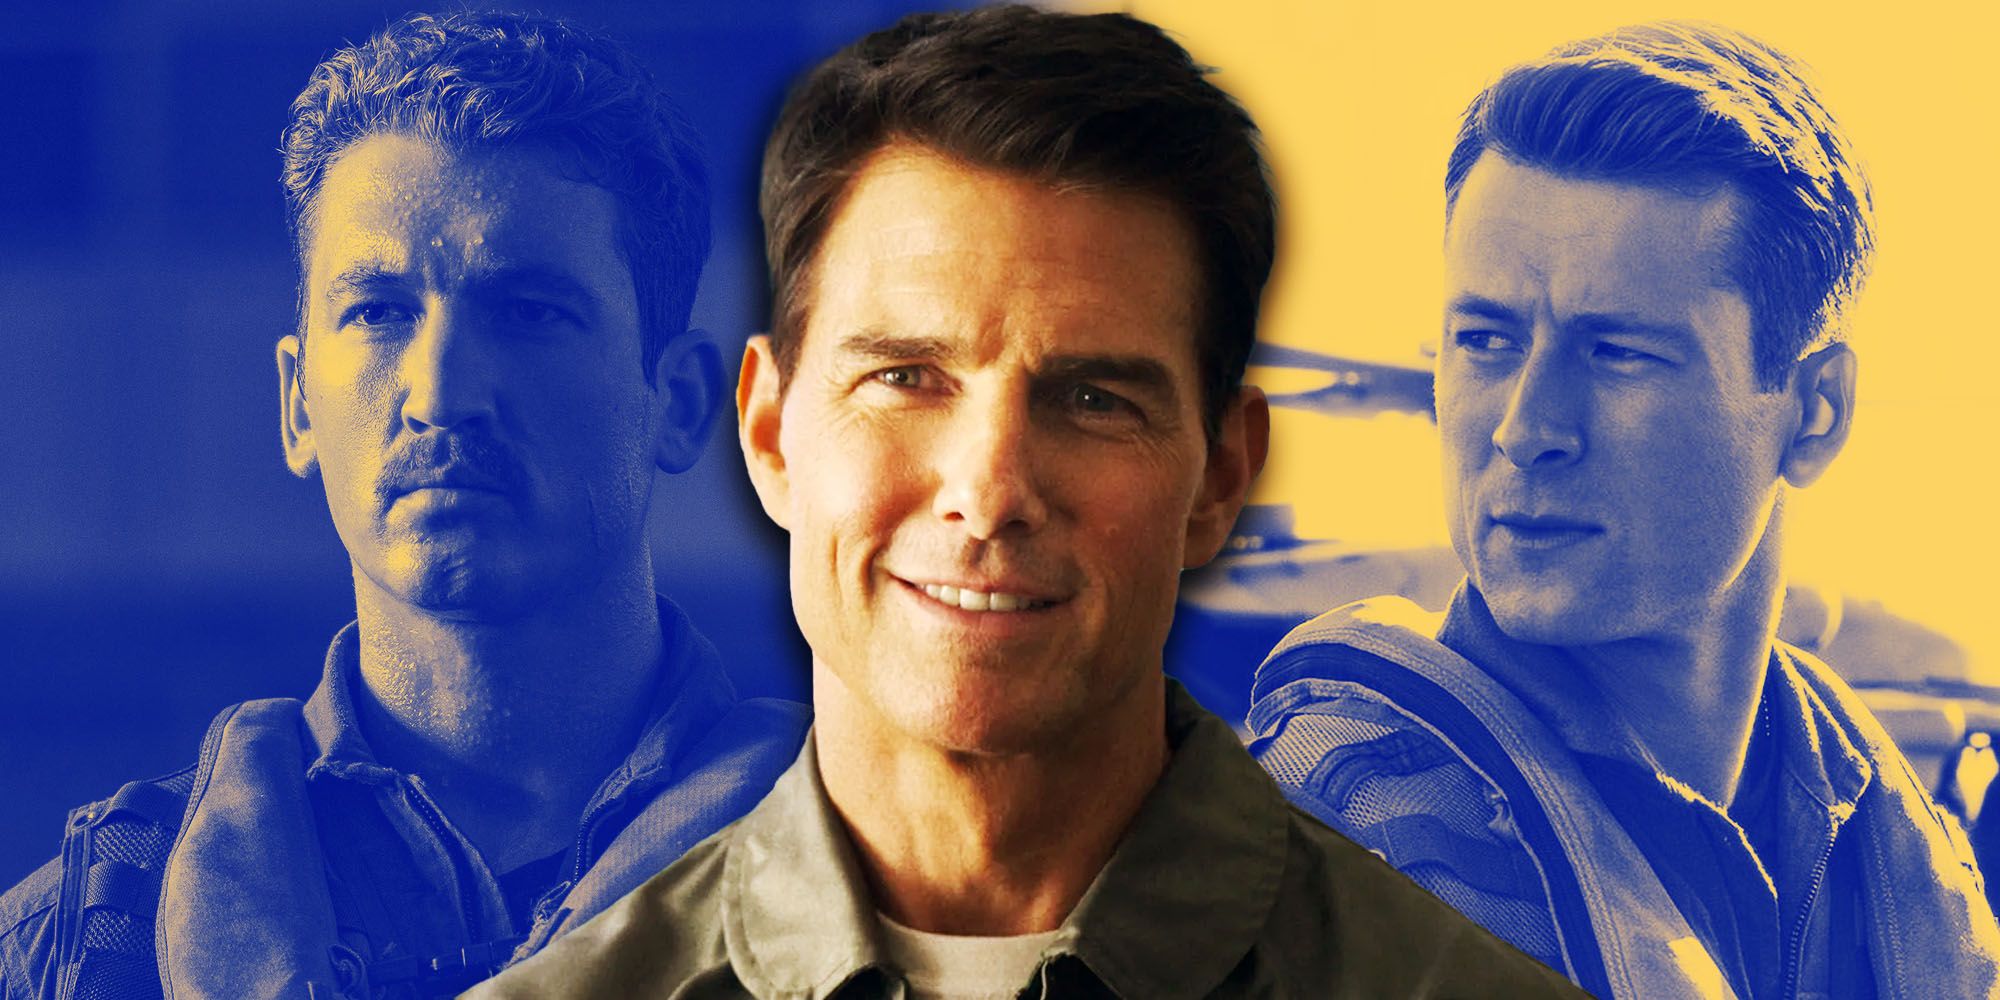 There Is a Real-Life 'Viper,' and He Made a Cameo in 'Top Gun